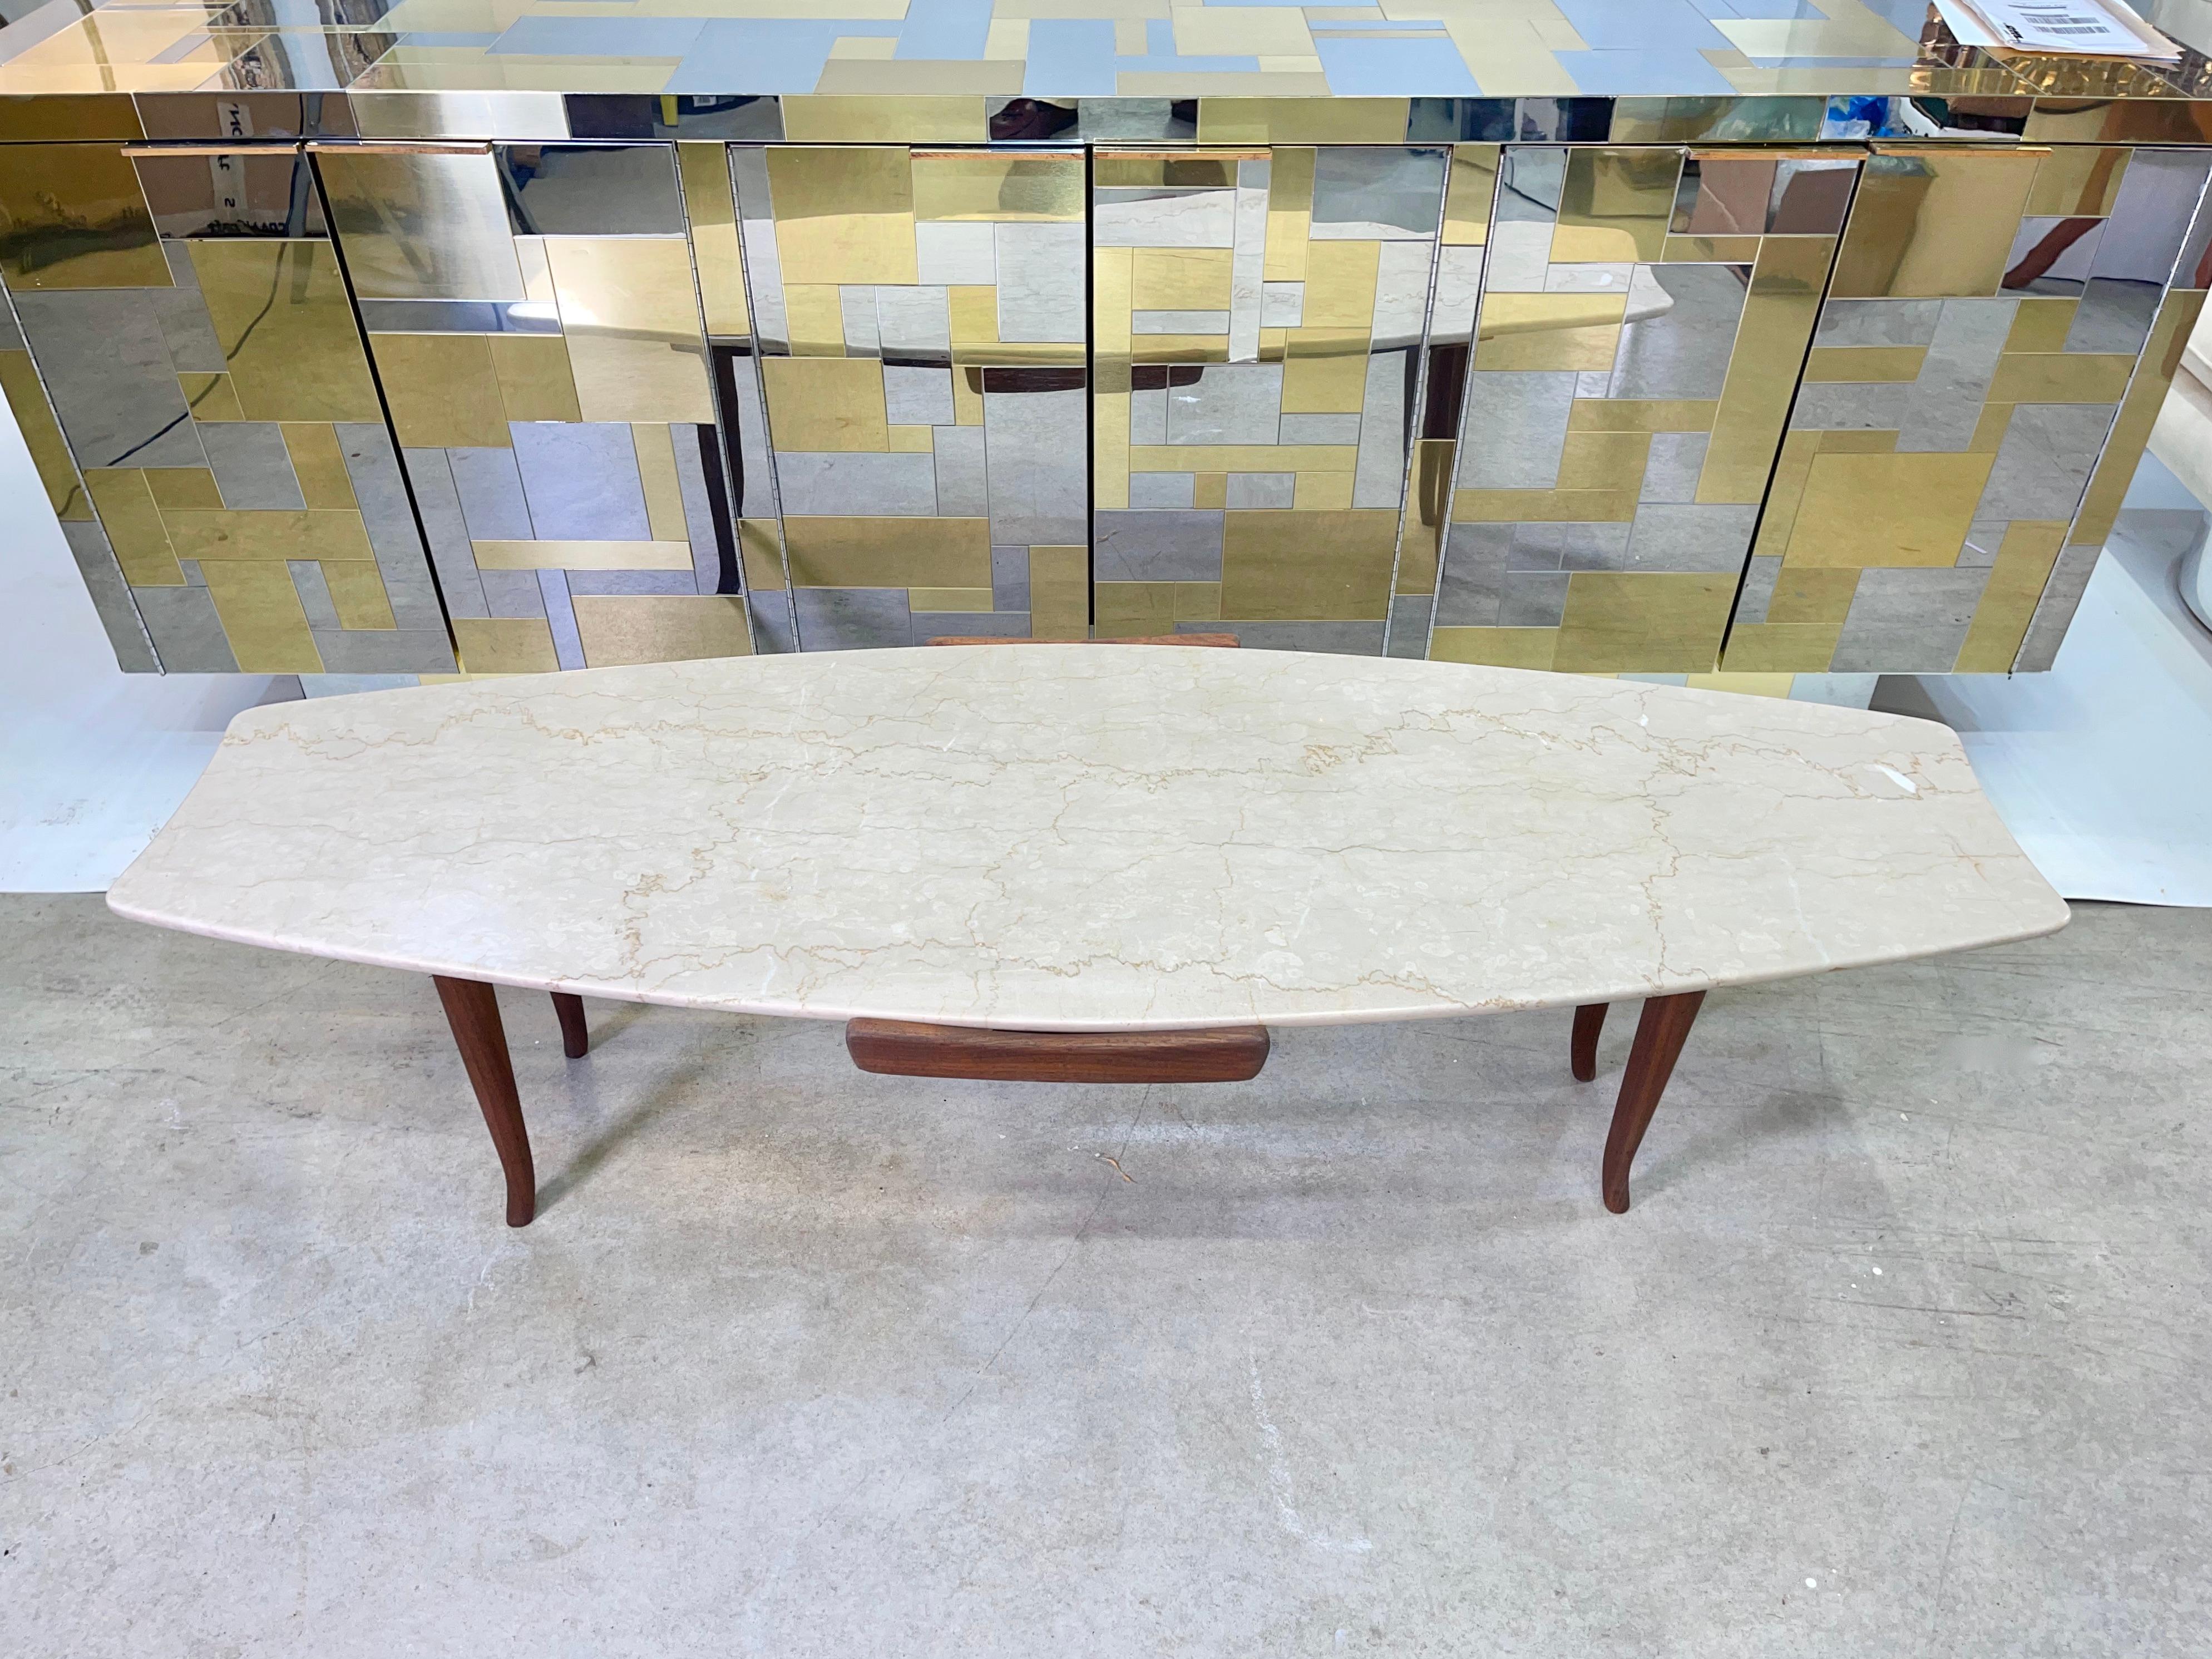 Erno Fabry Fishtail Surfboard Marble & Walnut Cocktail Table In Good Condition For Sale In Hanover, MA